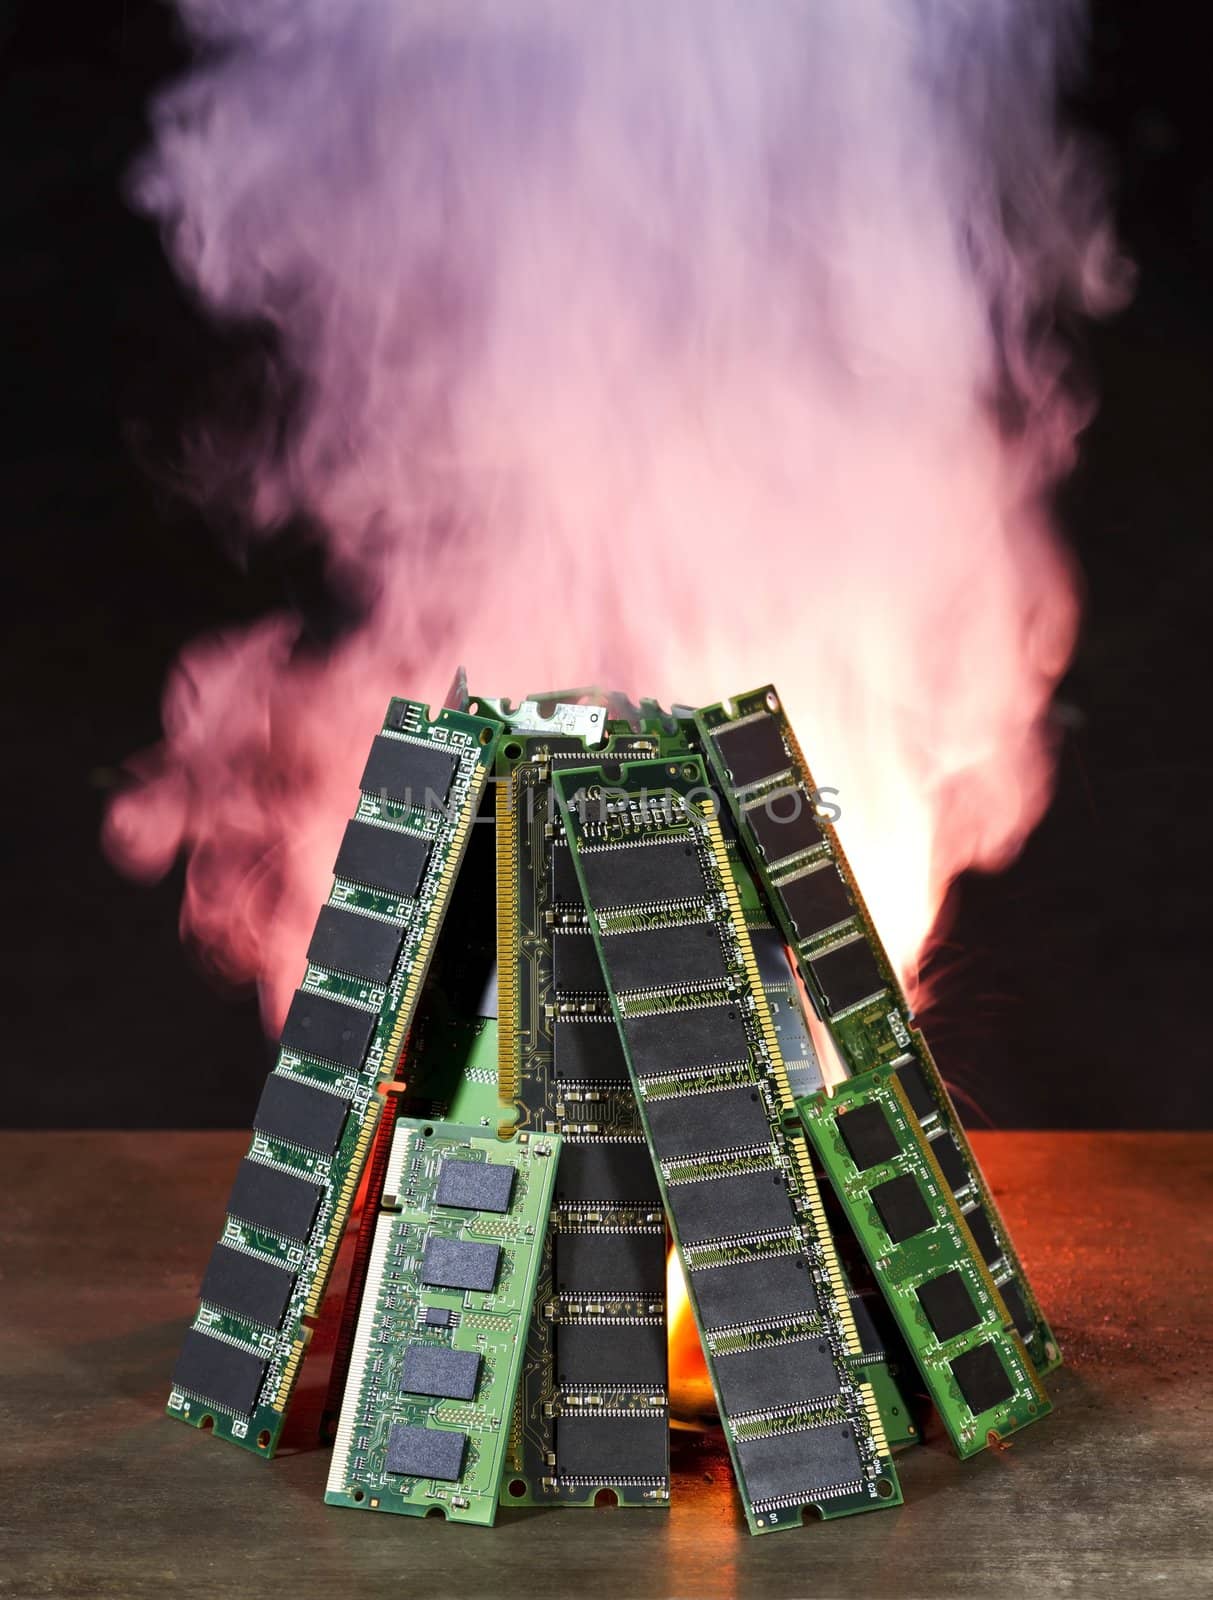 burning computer memory modules with flames and smoke in black background